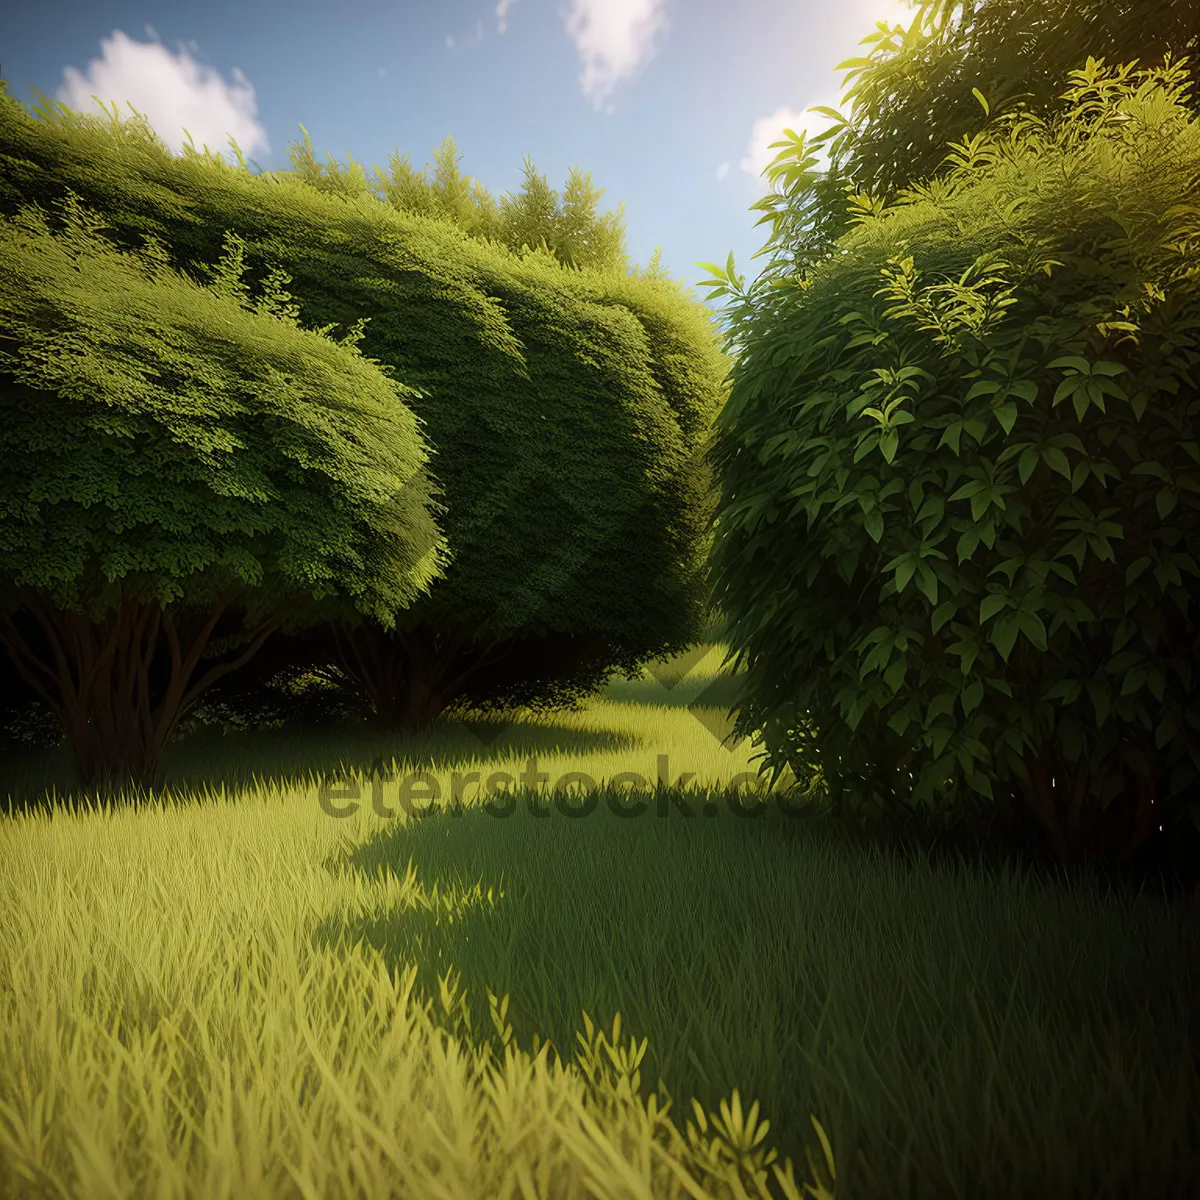 Picture of Serene Willow Tree in Picturesque Meadow